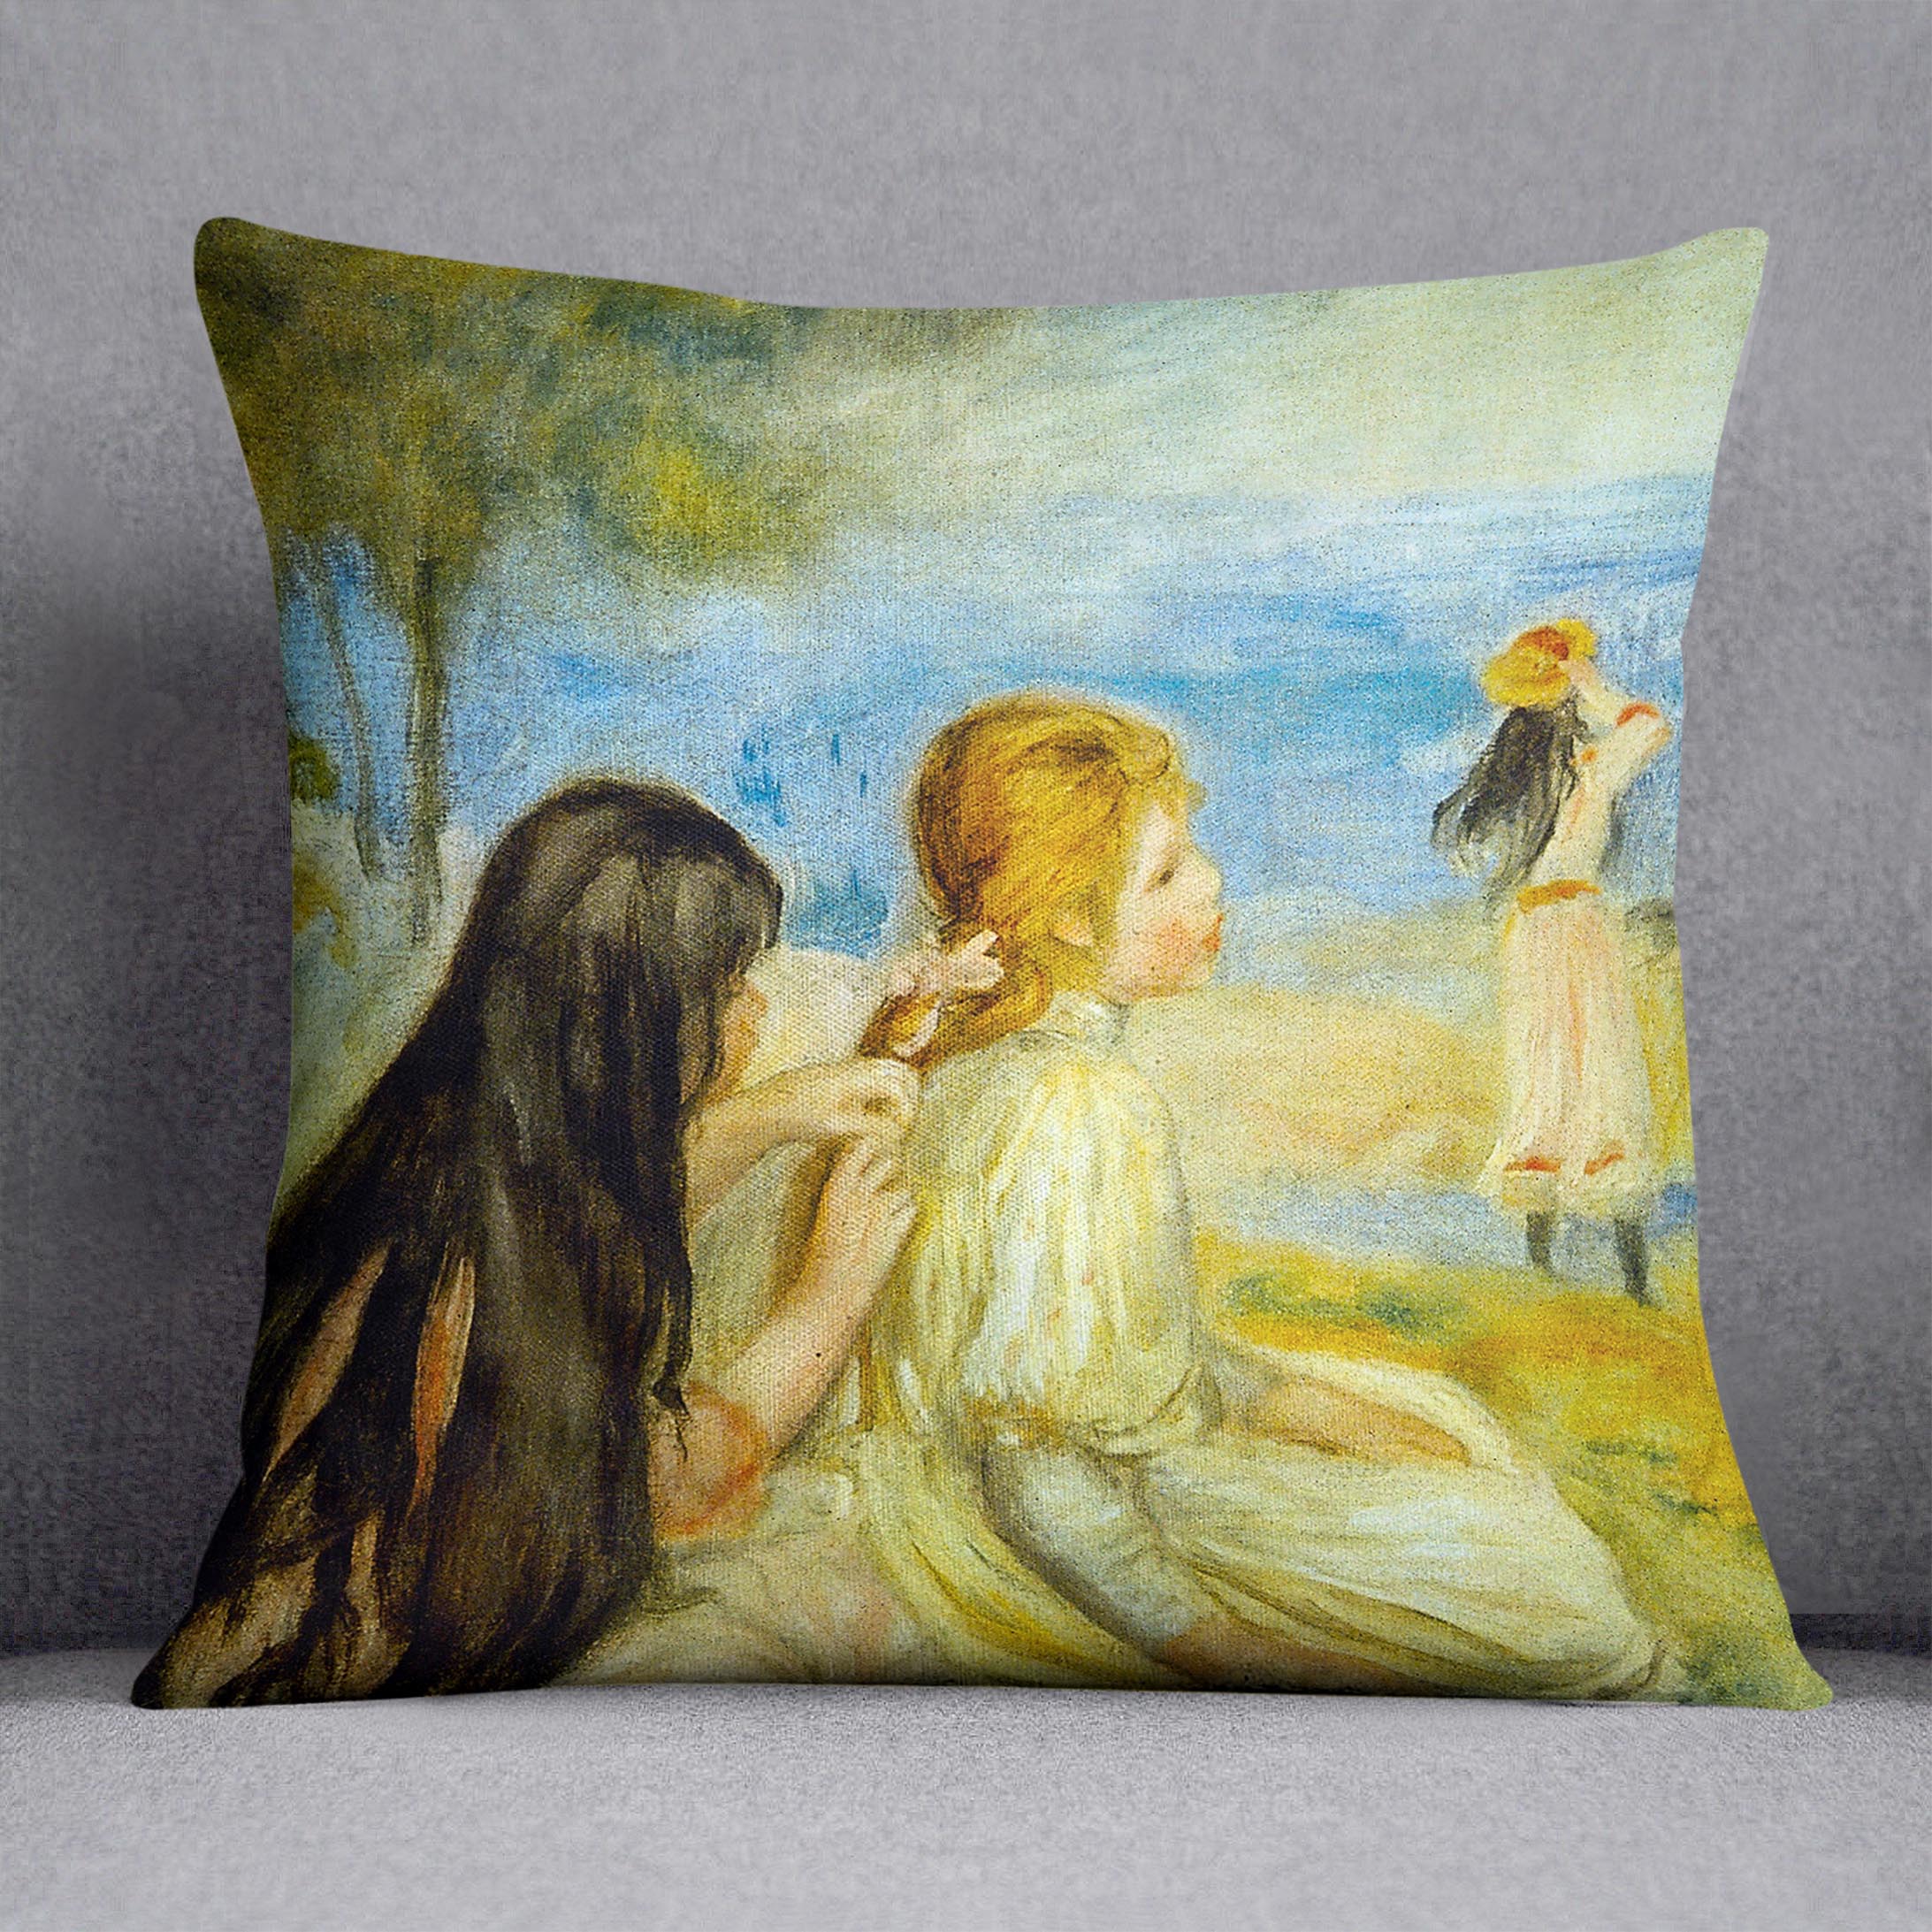 Girls by the Seaside by Renoir Cushion